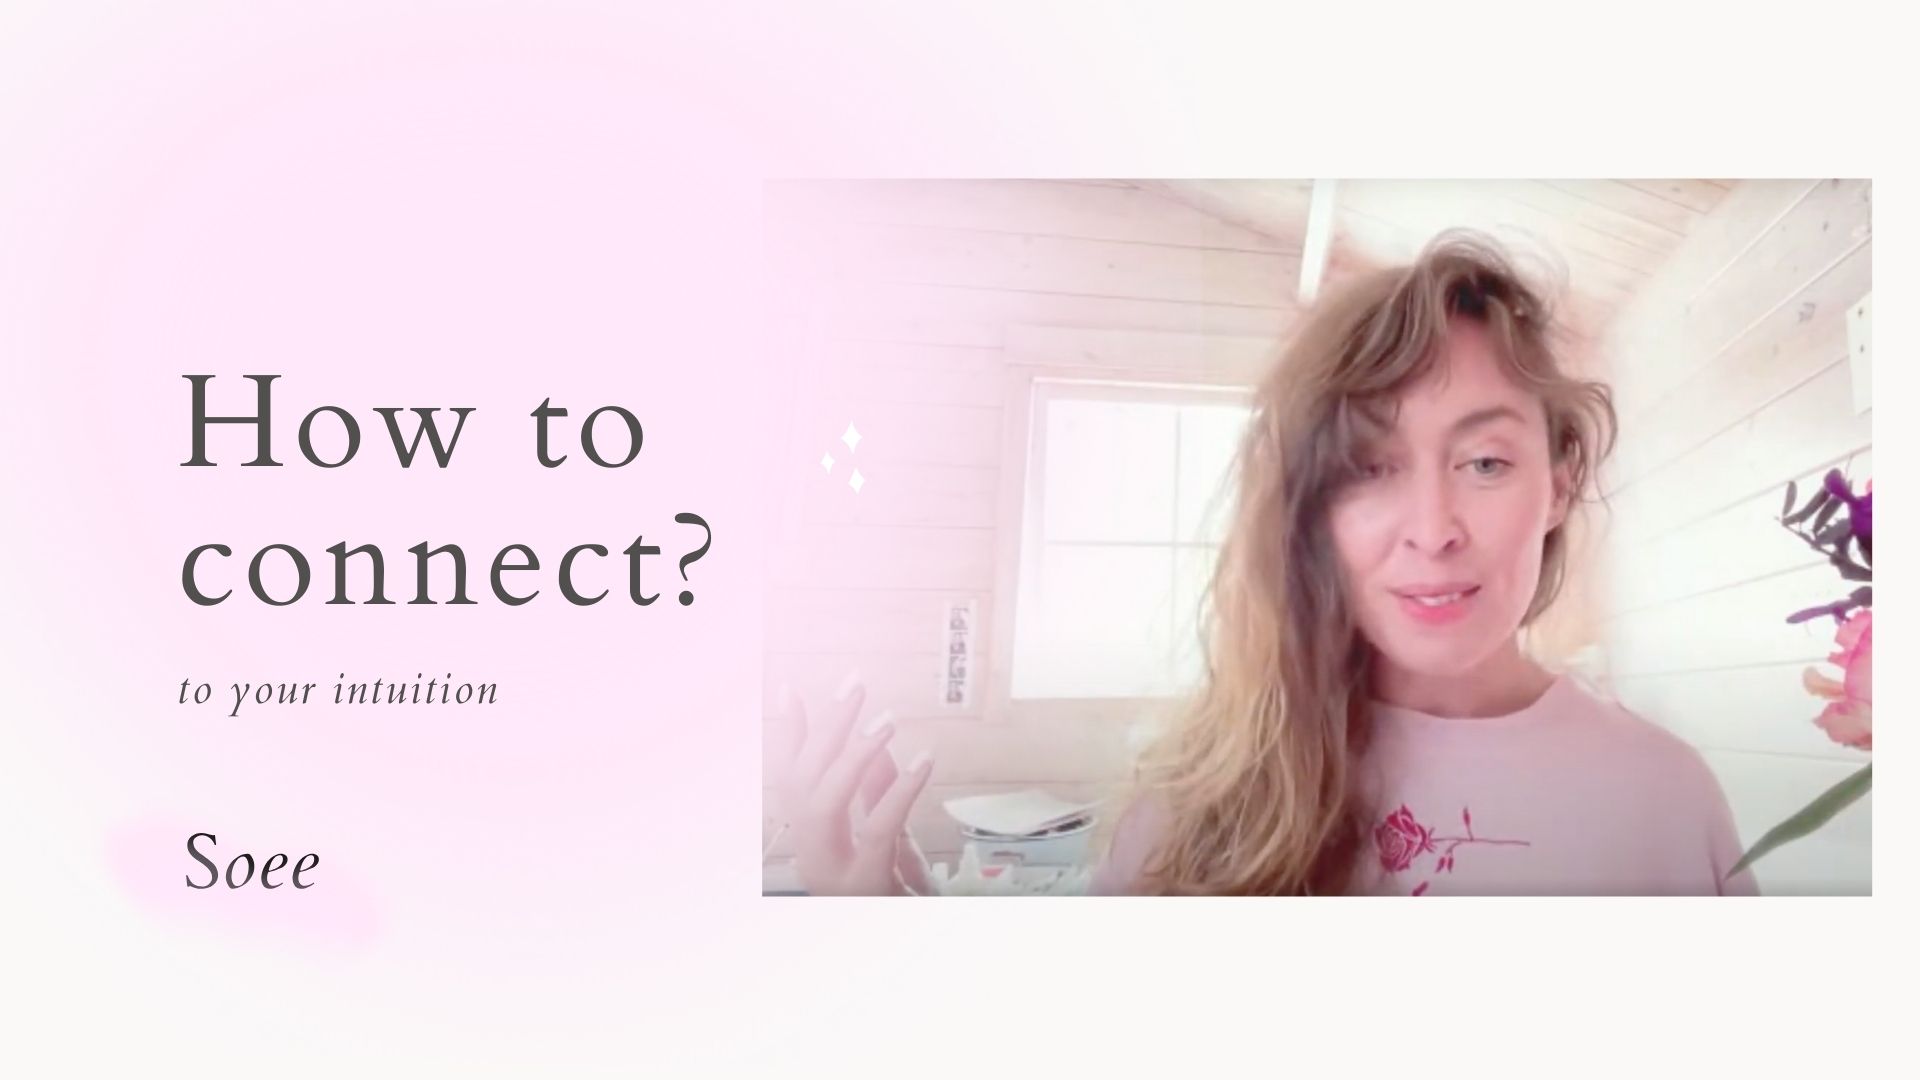 How to connect to your intuition